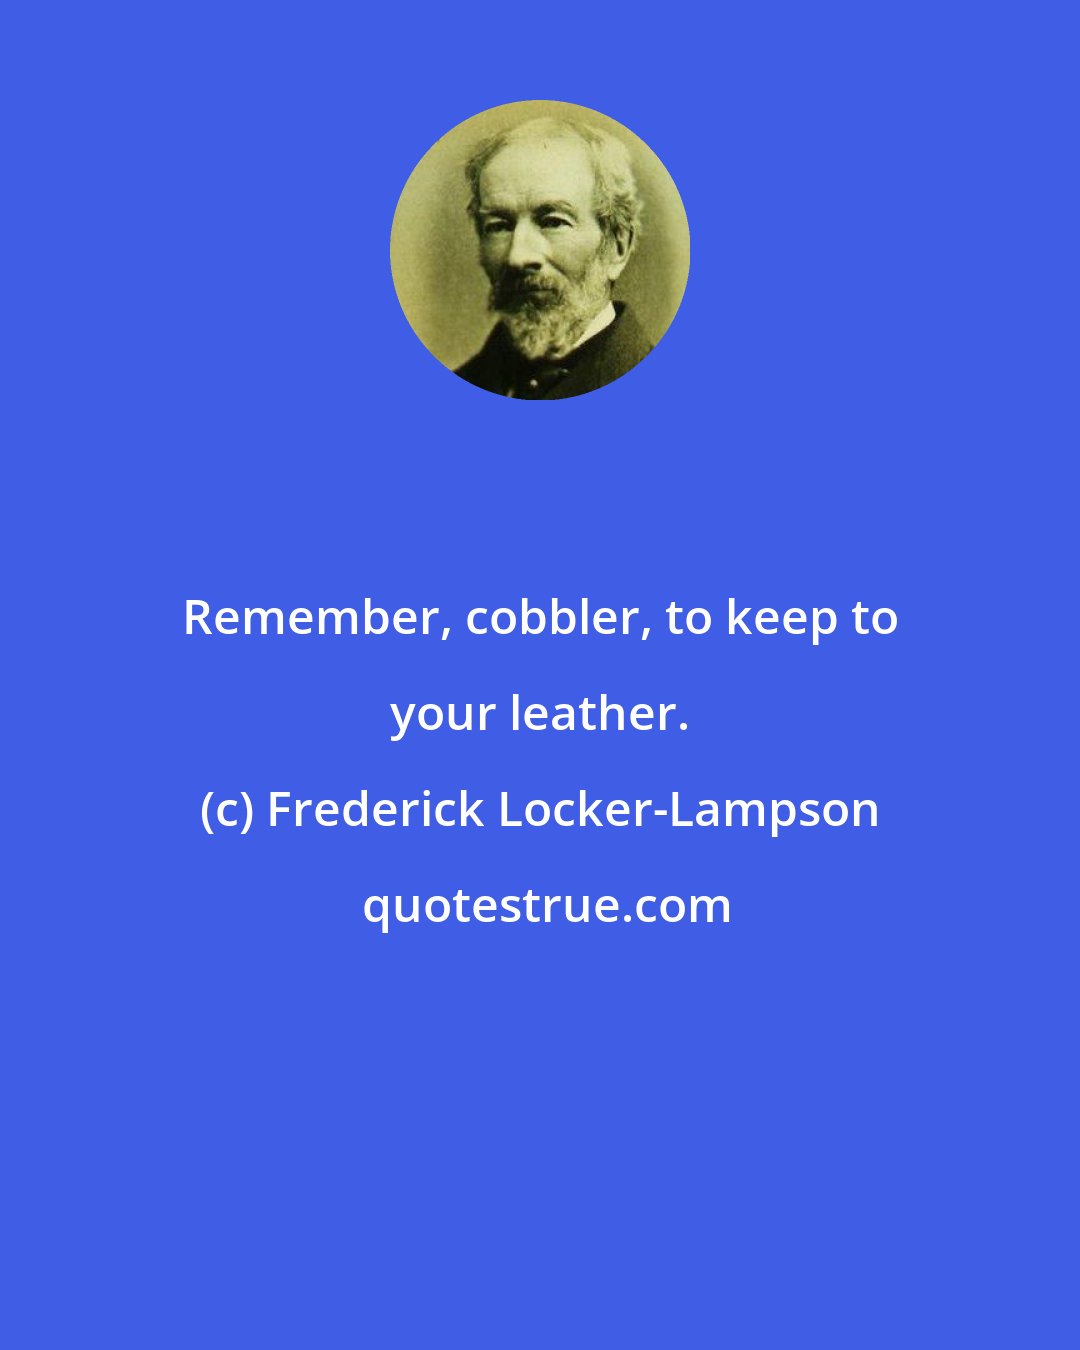 Frederick Locker-Lampson: Remember, cobbler, to keep to your leather.